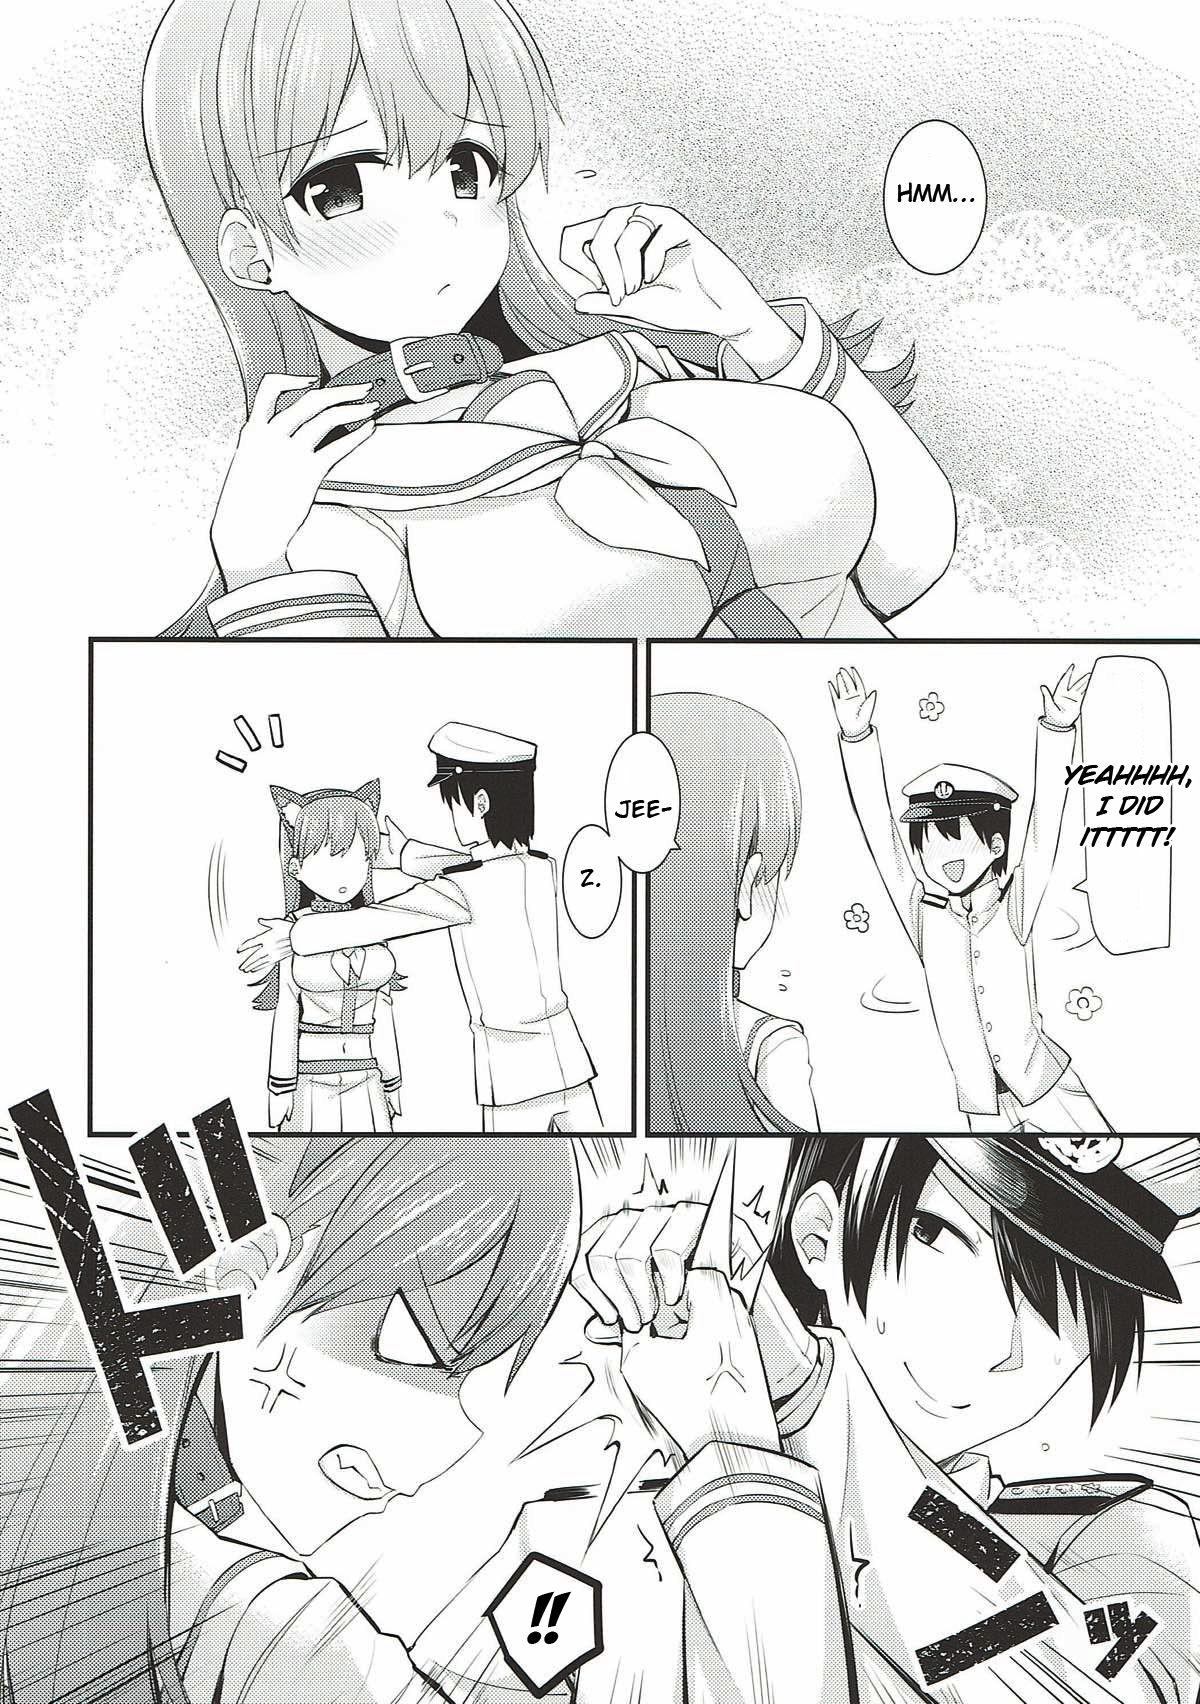 Cash Ooi! Nekomimi o Tsukeyou! | Ooi! Put On These Cat Ears! - Kantai collection Ethnic - Page 7